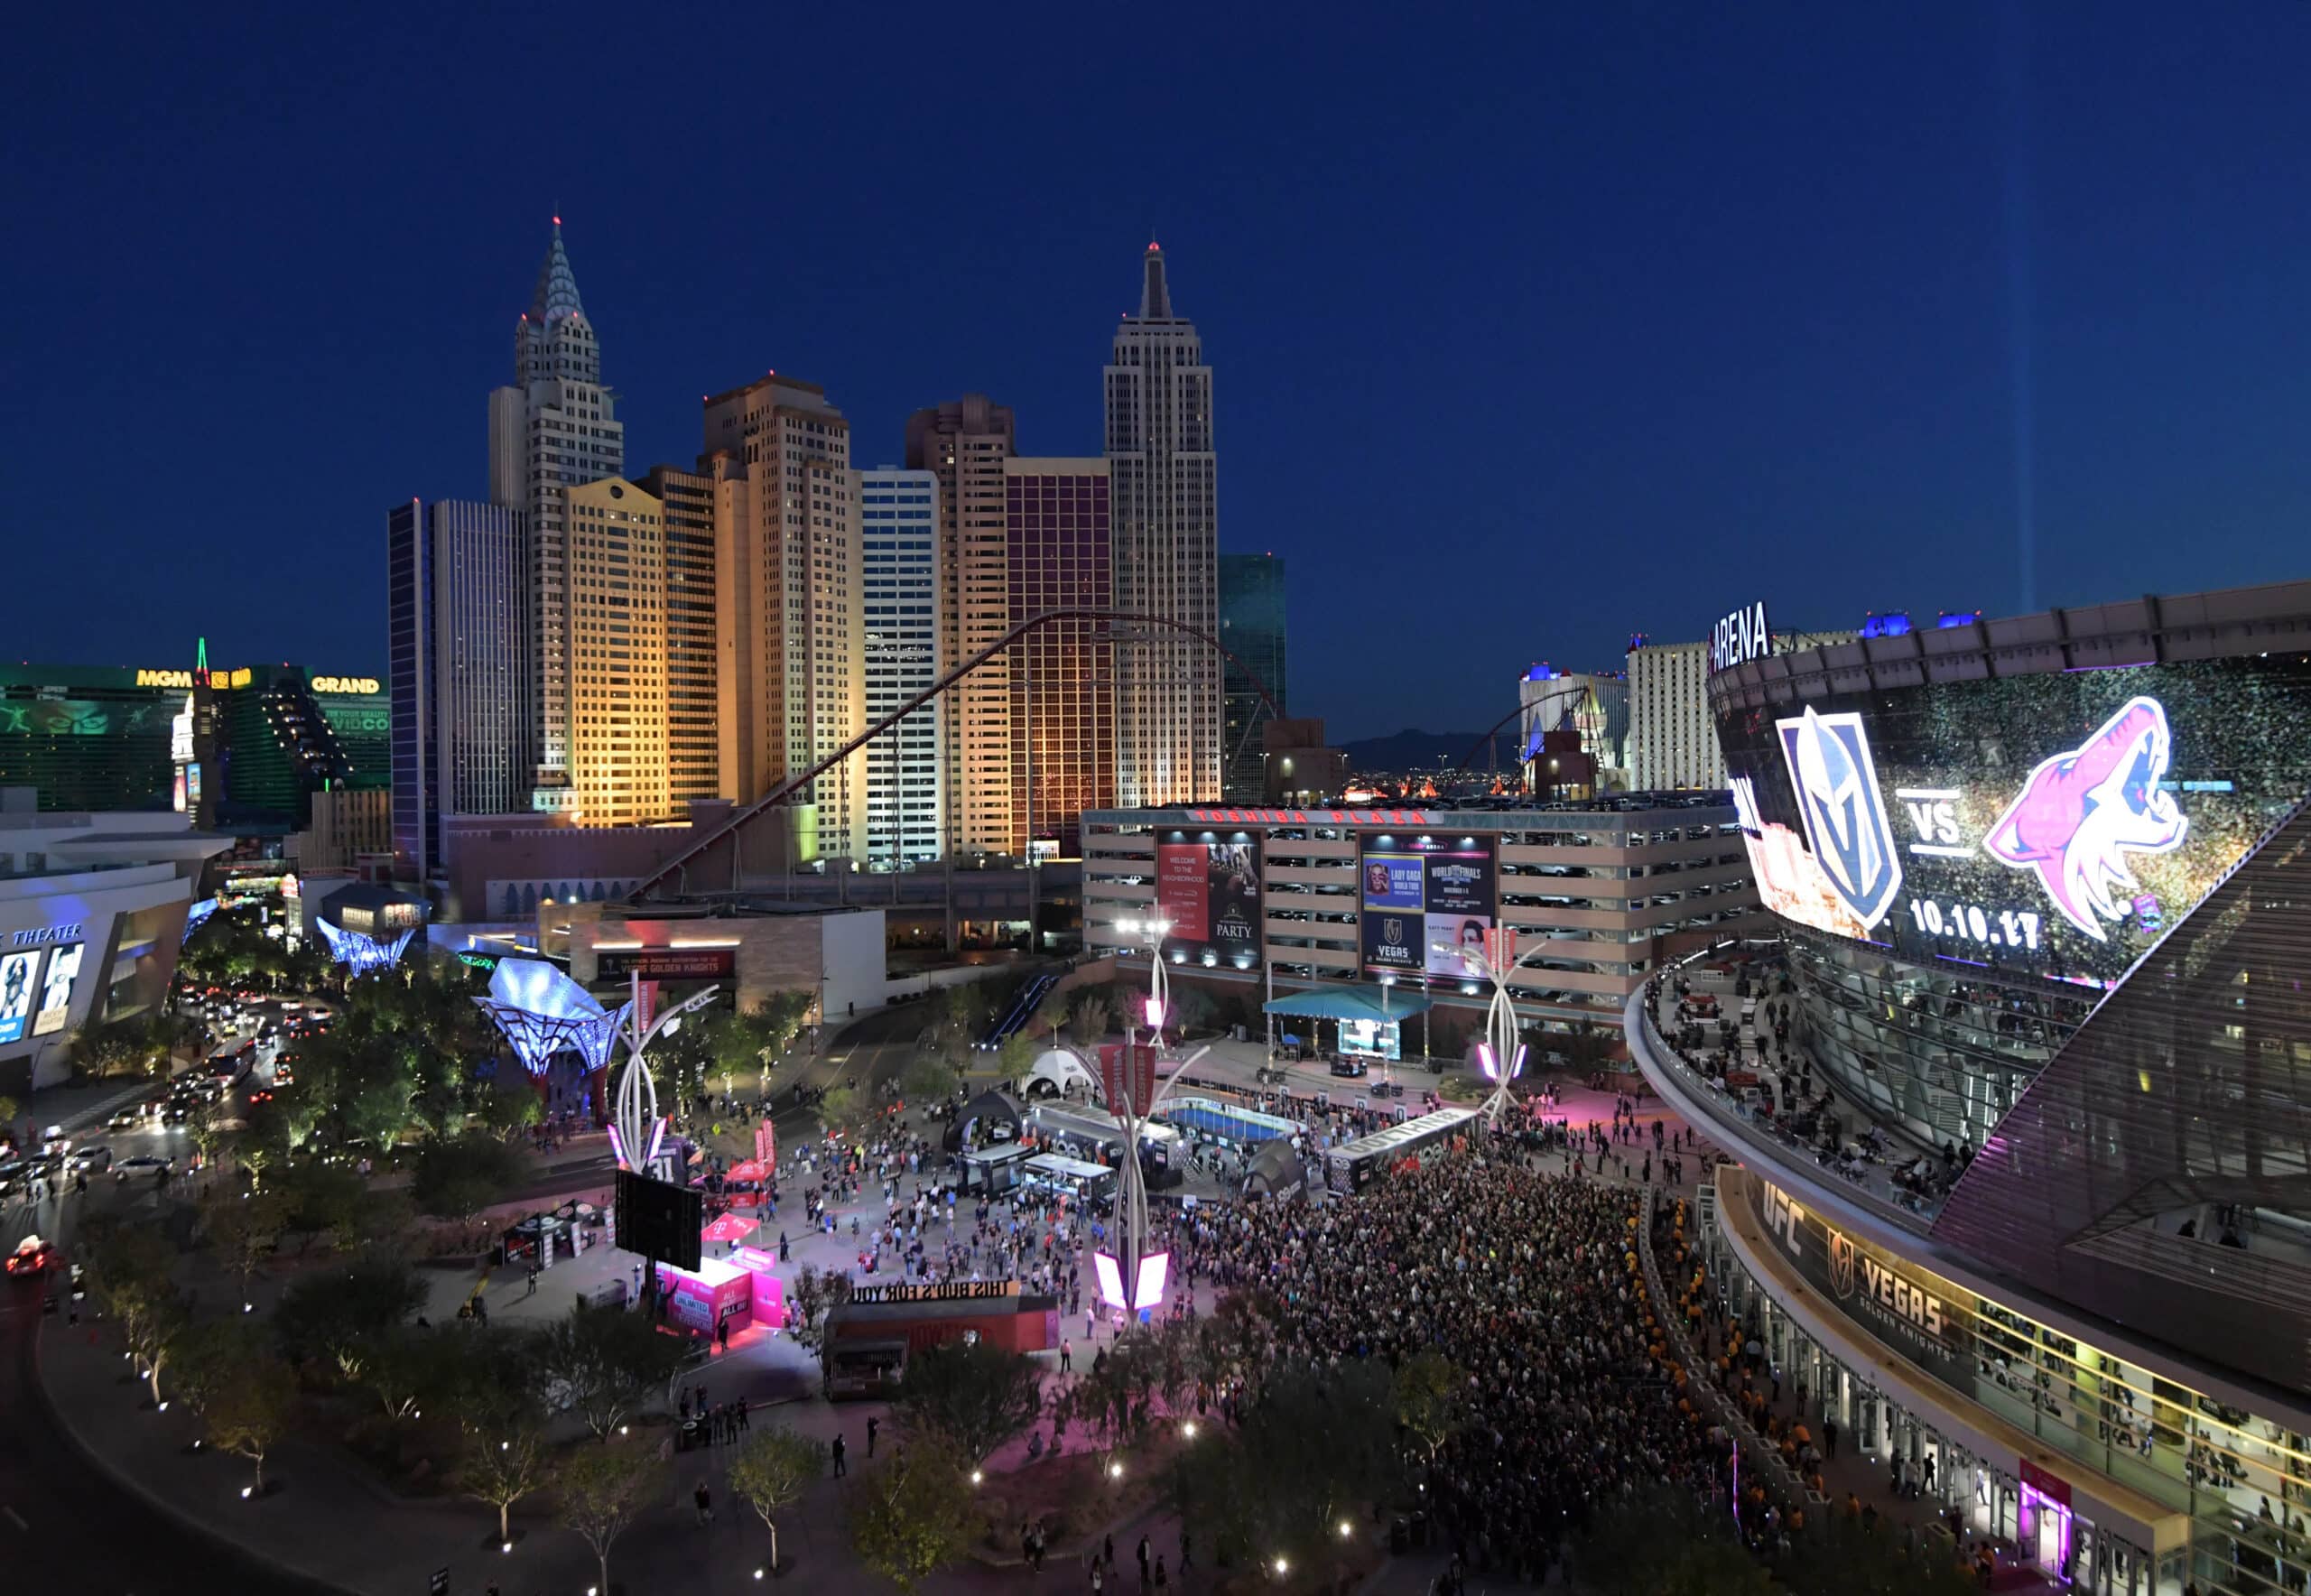 Pro football is finally coming to Las Vegas - MGM Resorts